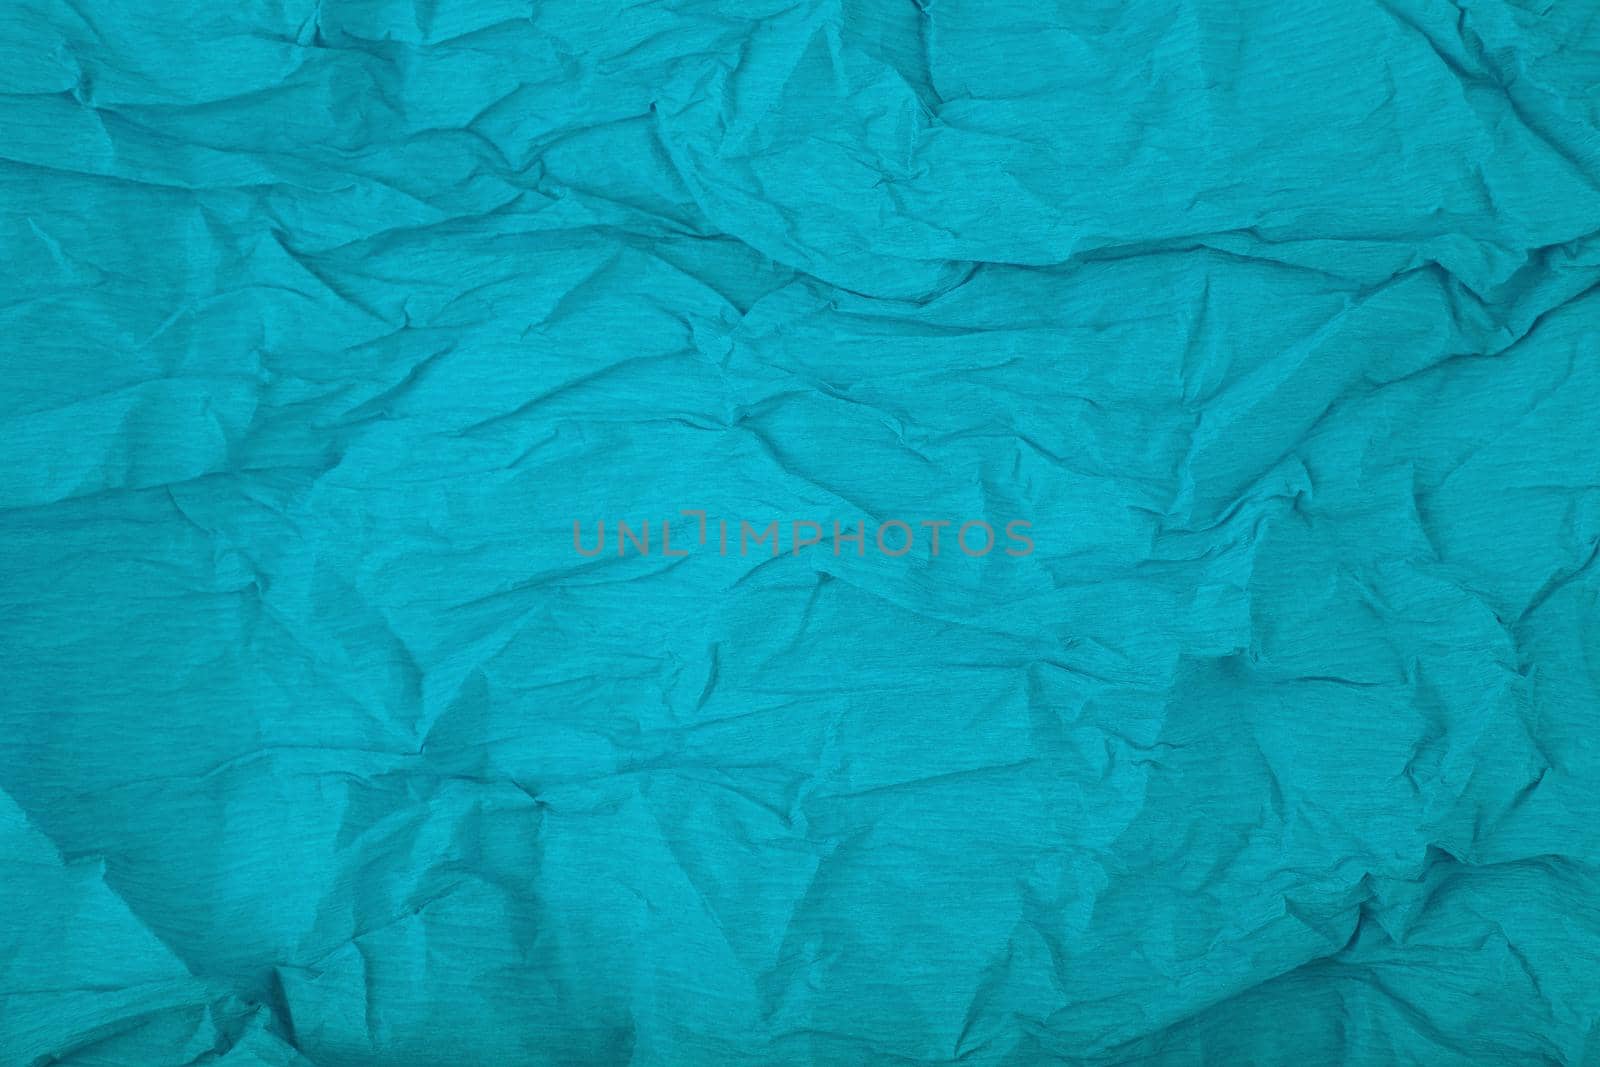 Aqua blue crumpled corrugated wrapping paper background with space for text by Senorina_Irina